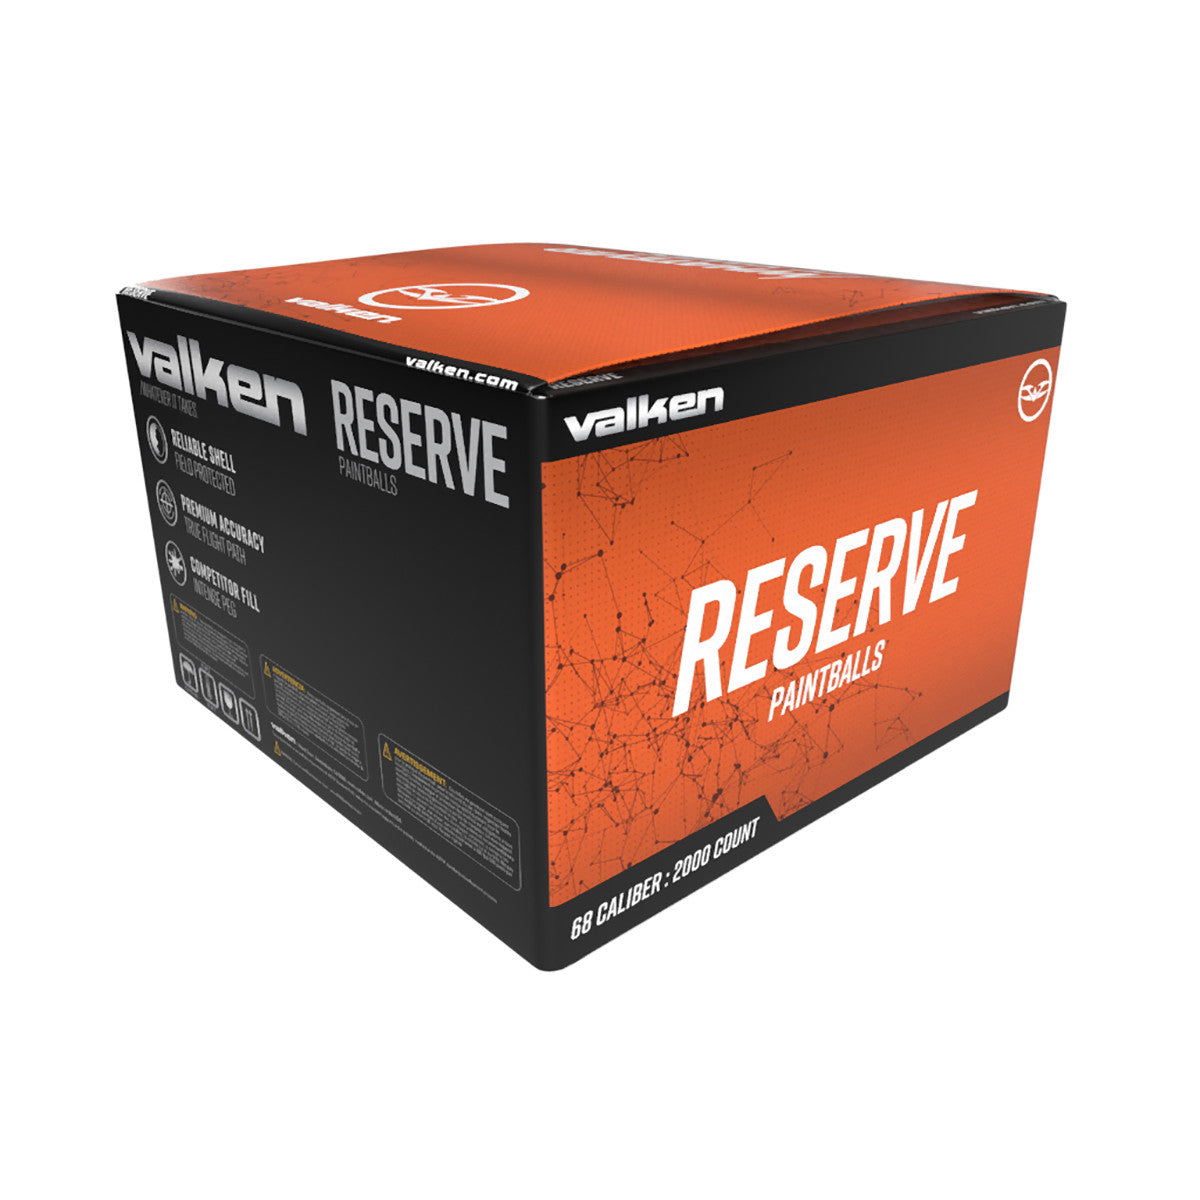 Valken Reserve Paintballs - 2000 count - 0.50 cal - UV/Bright Yellow - Yellow Fill